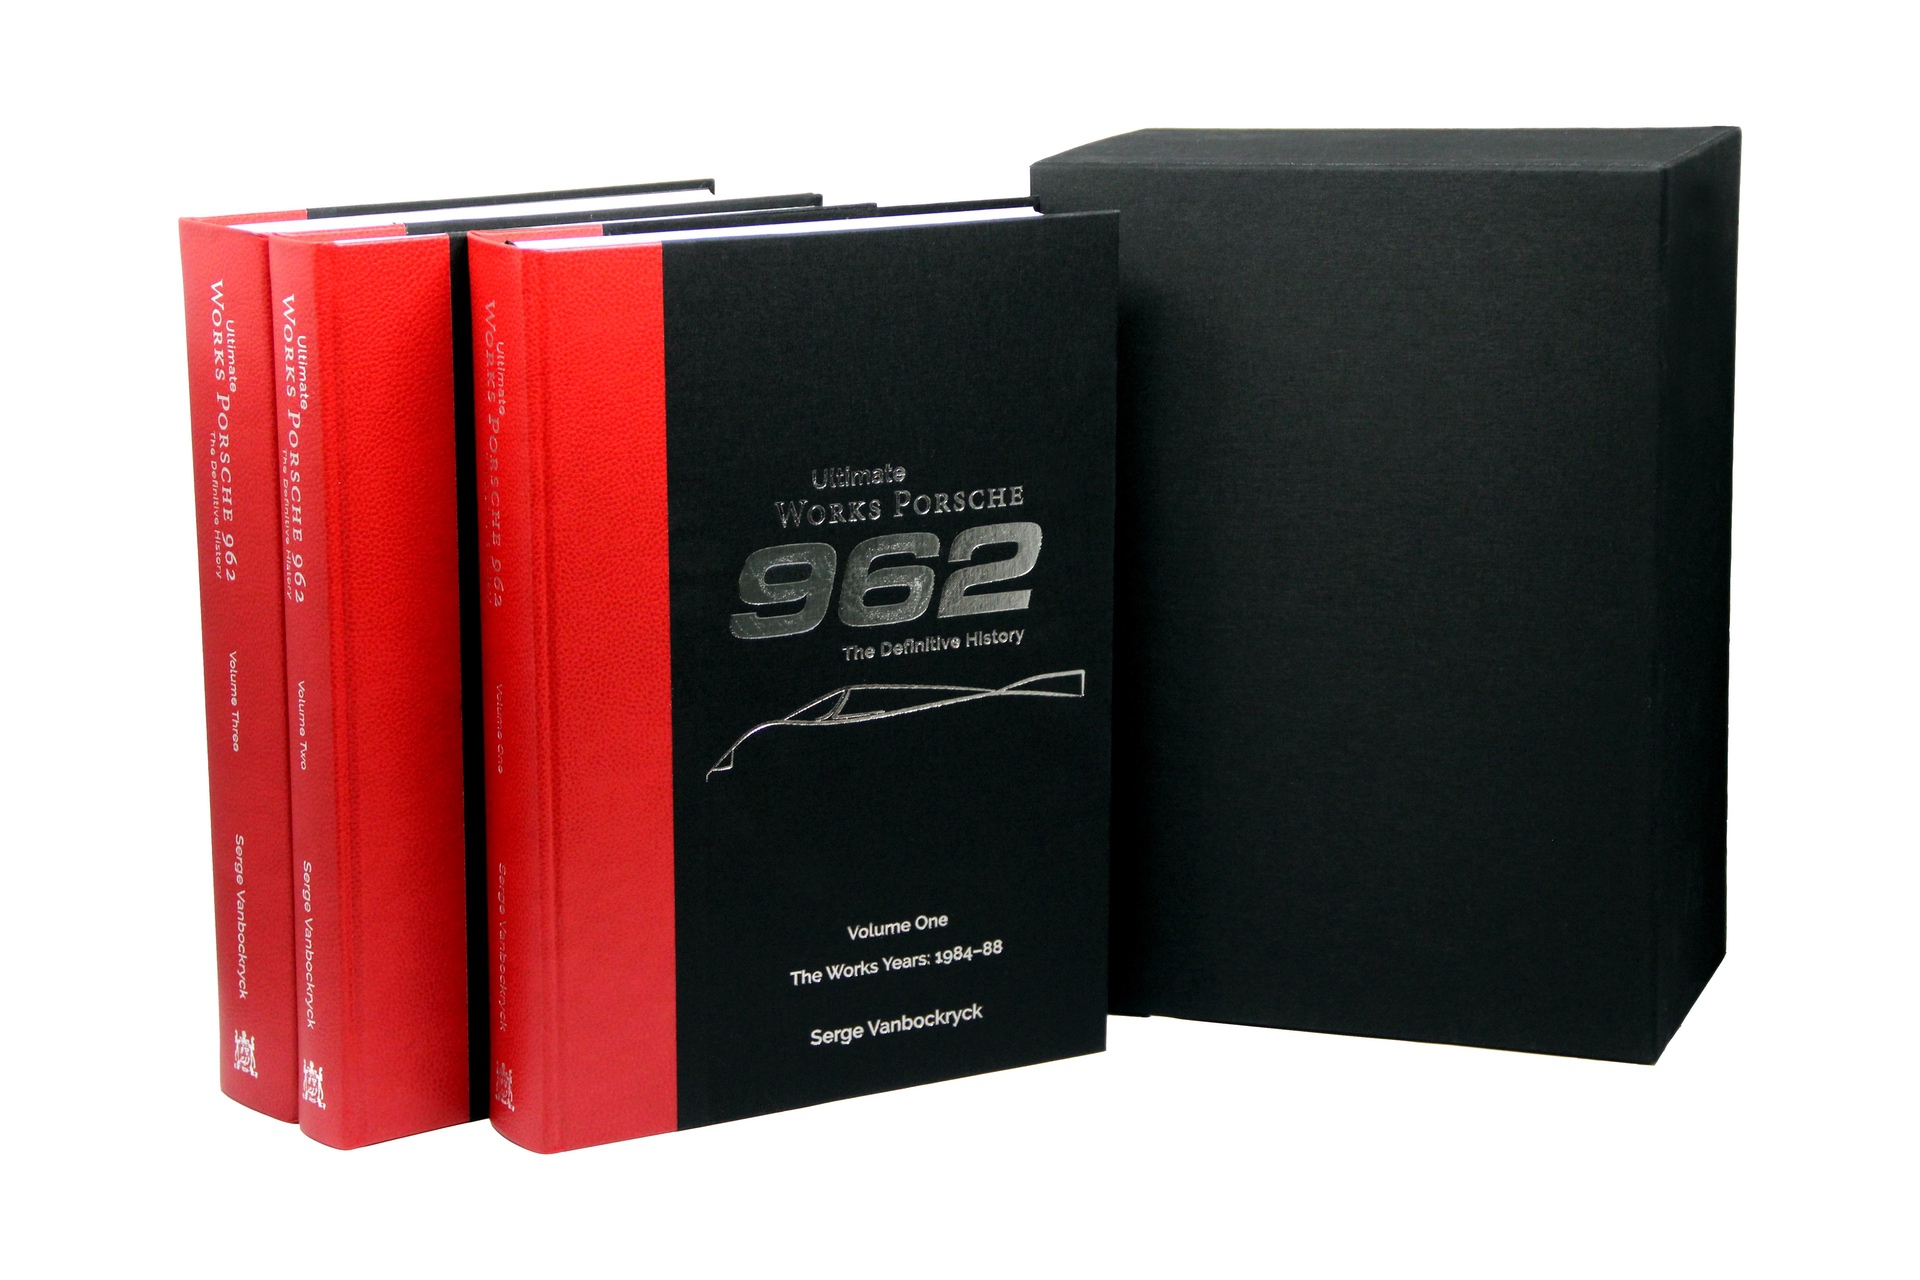 Box set for Ultimate Works Porsche 962 - The Definitive History on white background